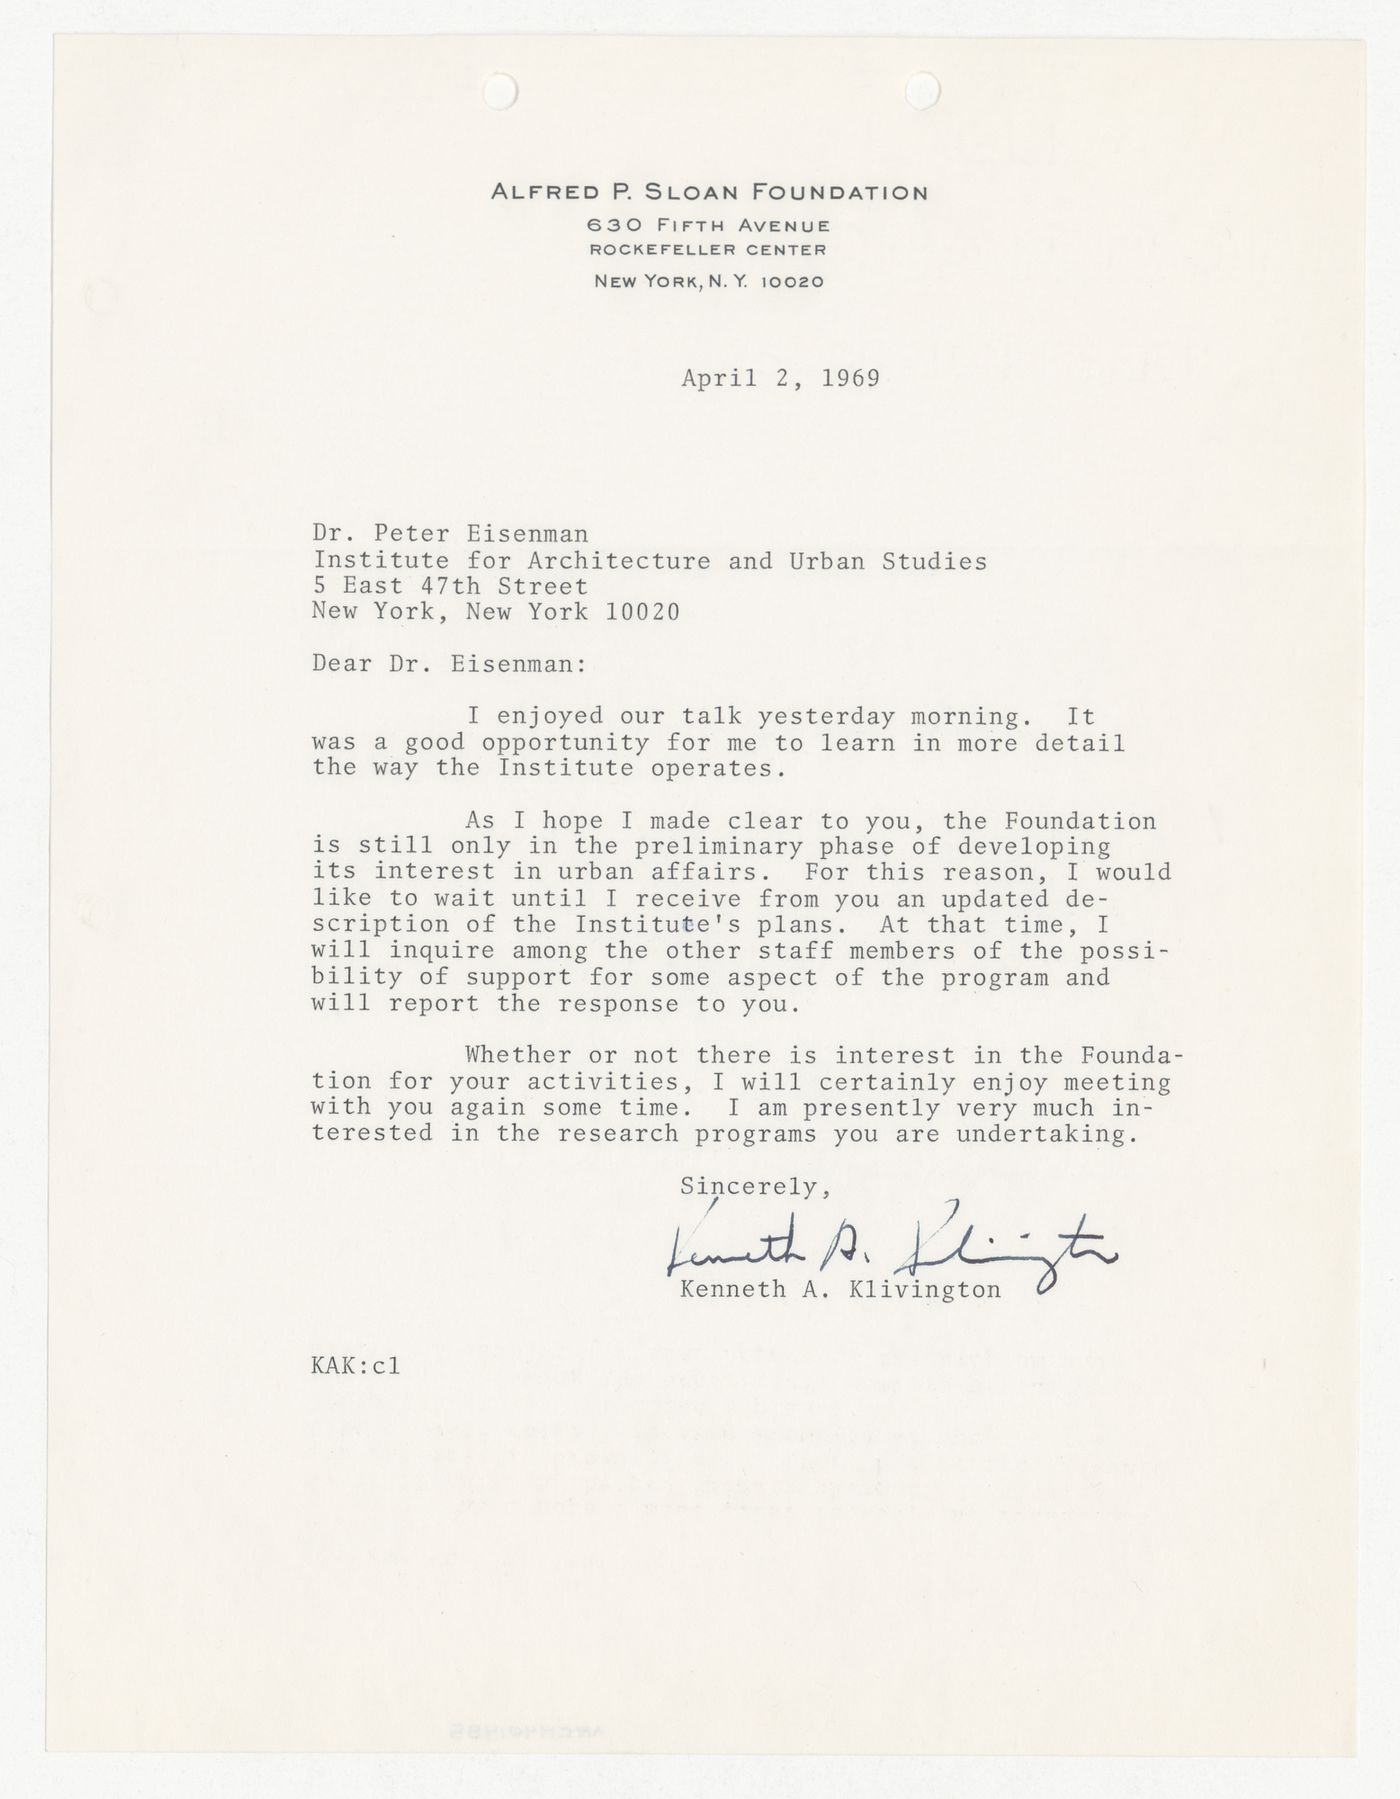 Letter from Kenneth A. Klivington to Peter D. Eisenman about support for IAUS